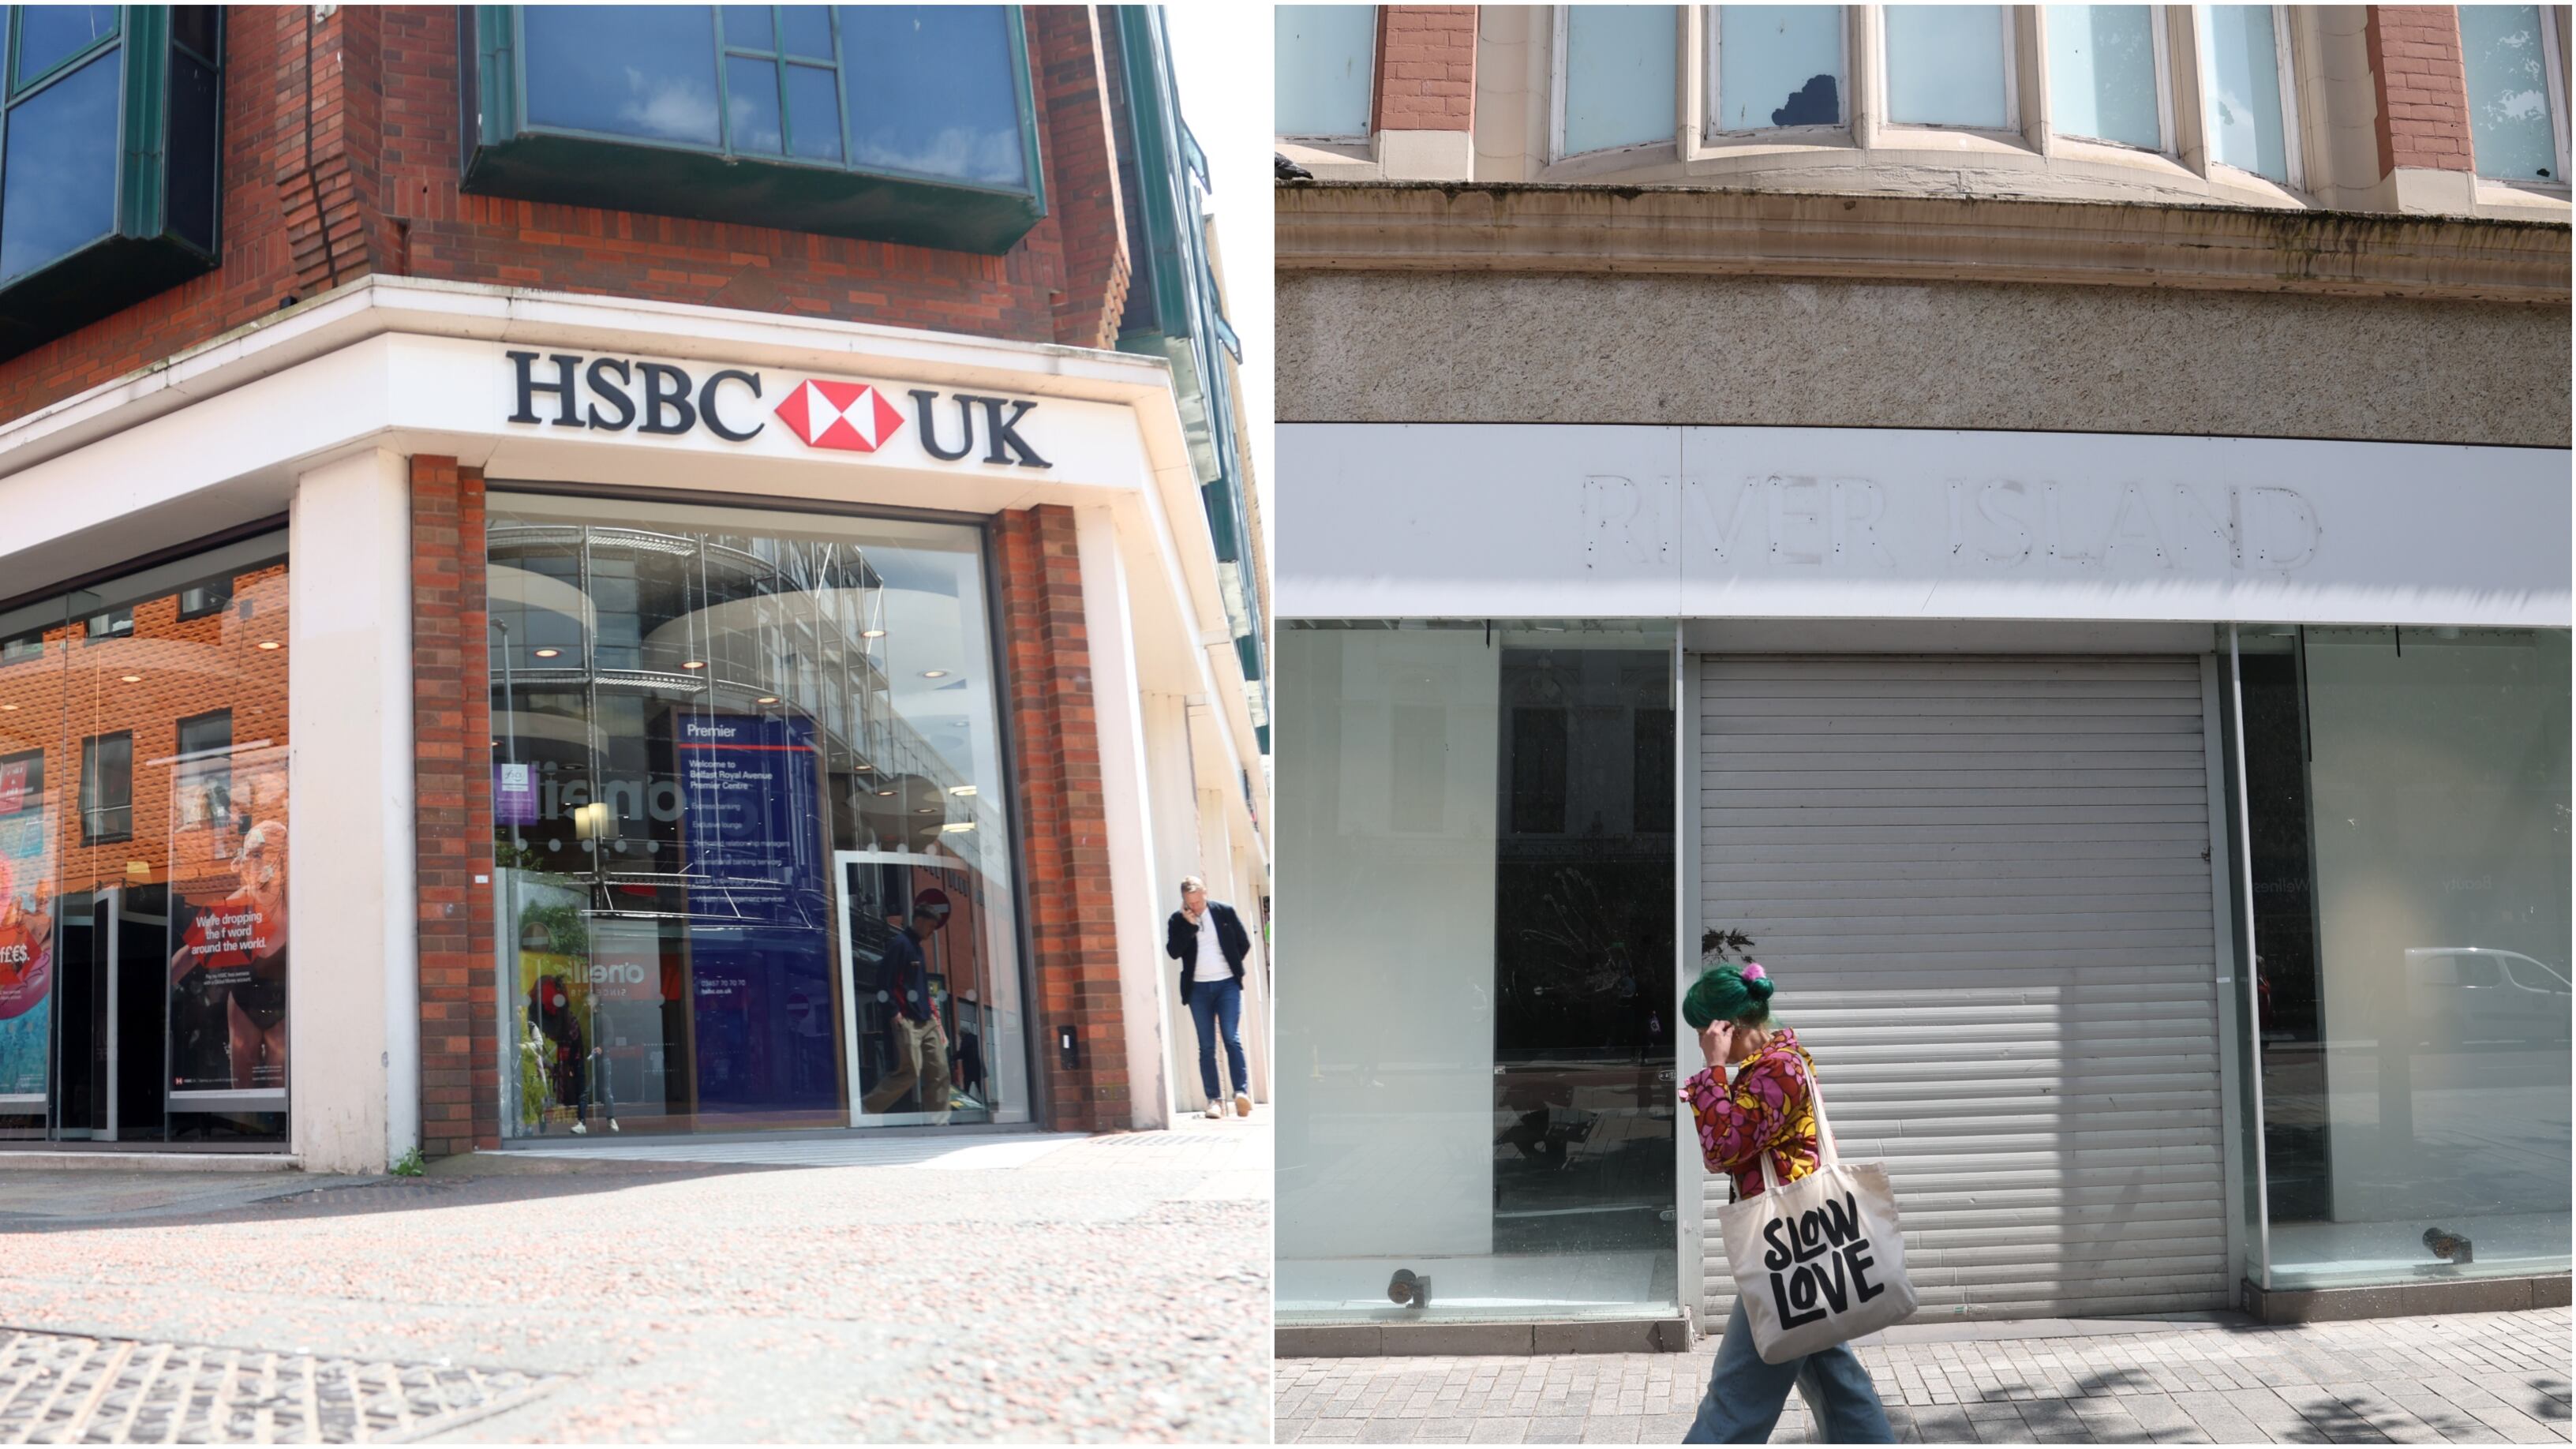 HSBC is set to move from its Belfast city centre retail bank from Royal Avenue (left) to a former fashion retail unit in Donegall Place (right).